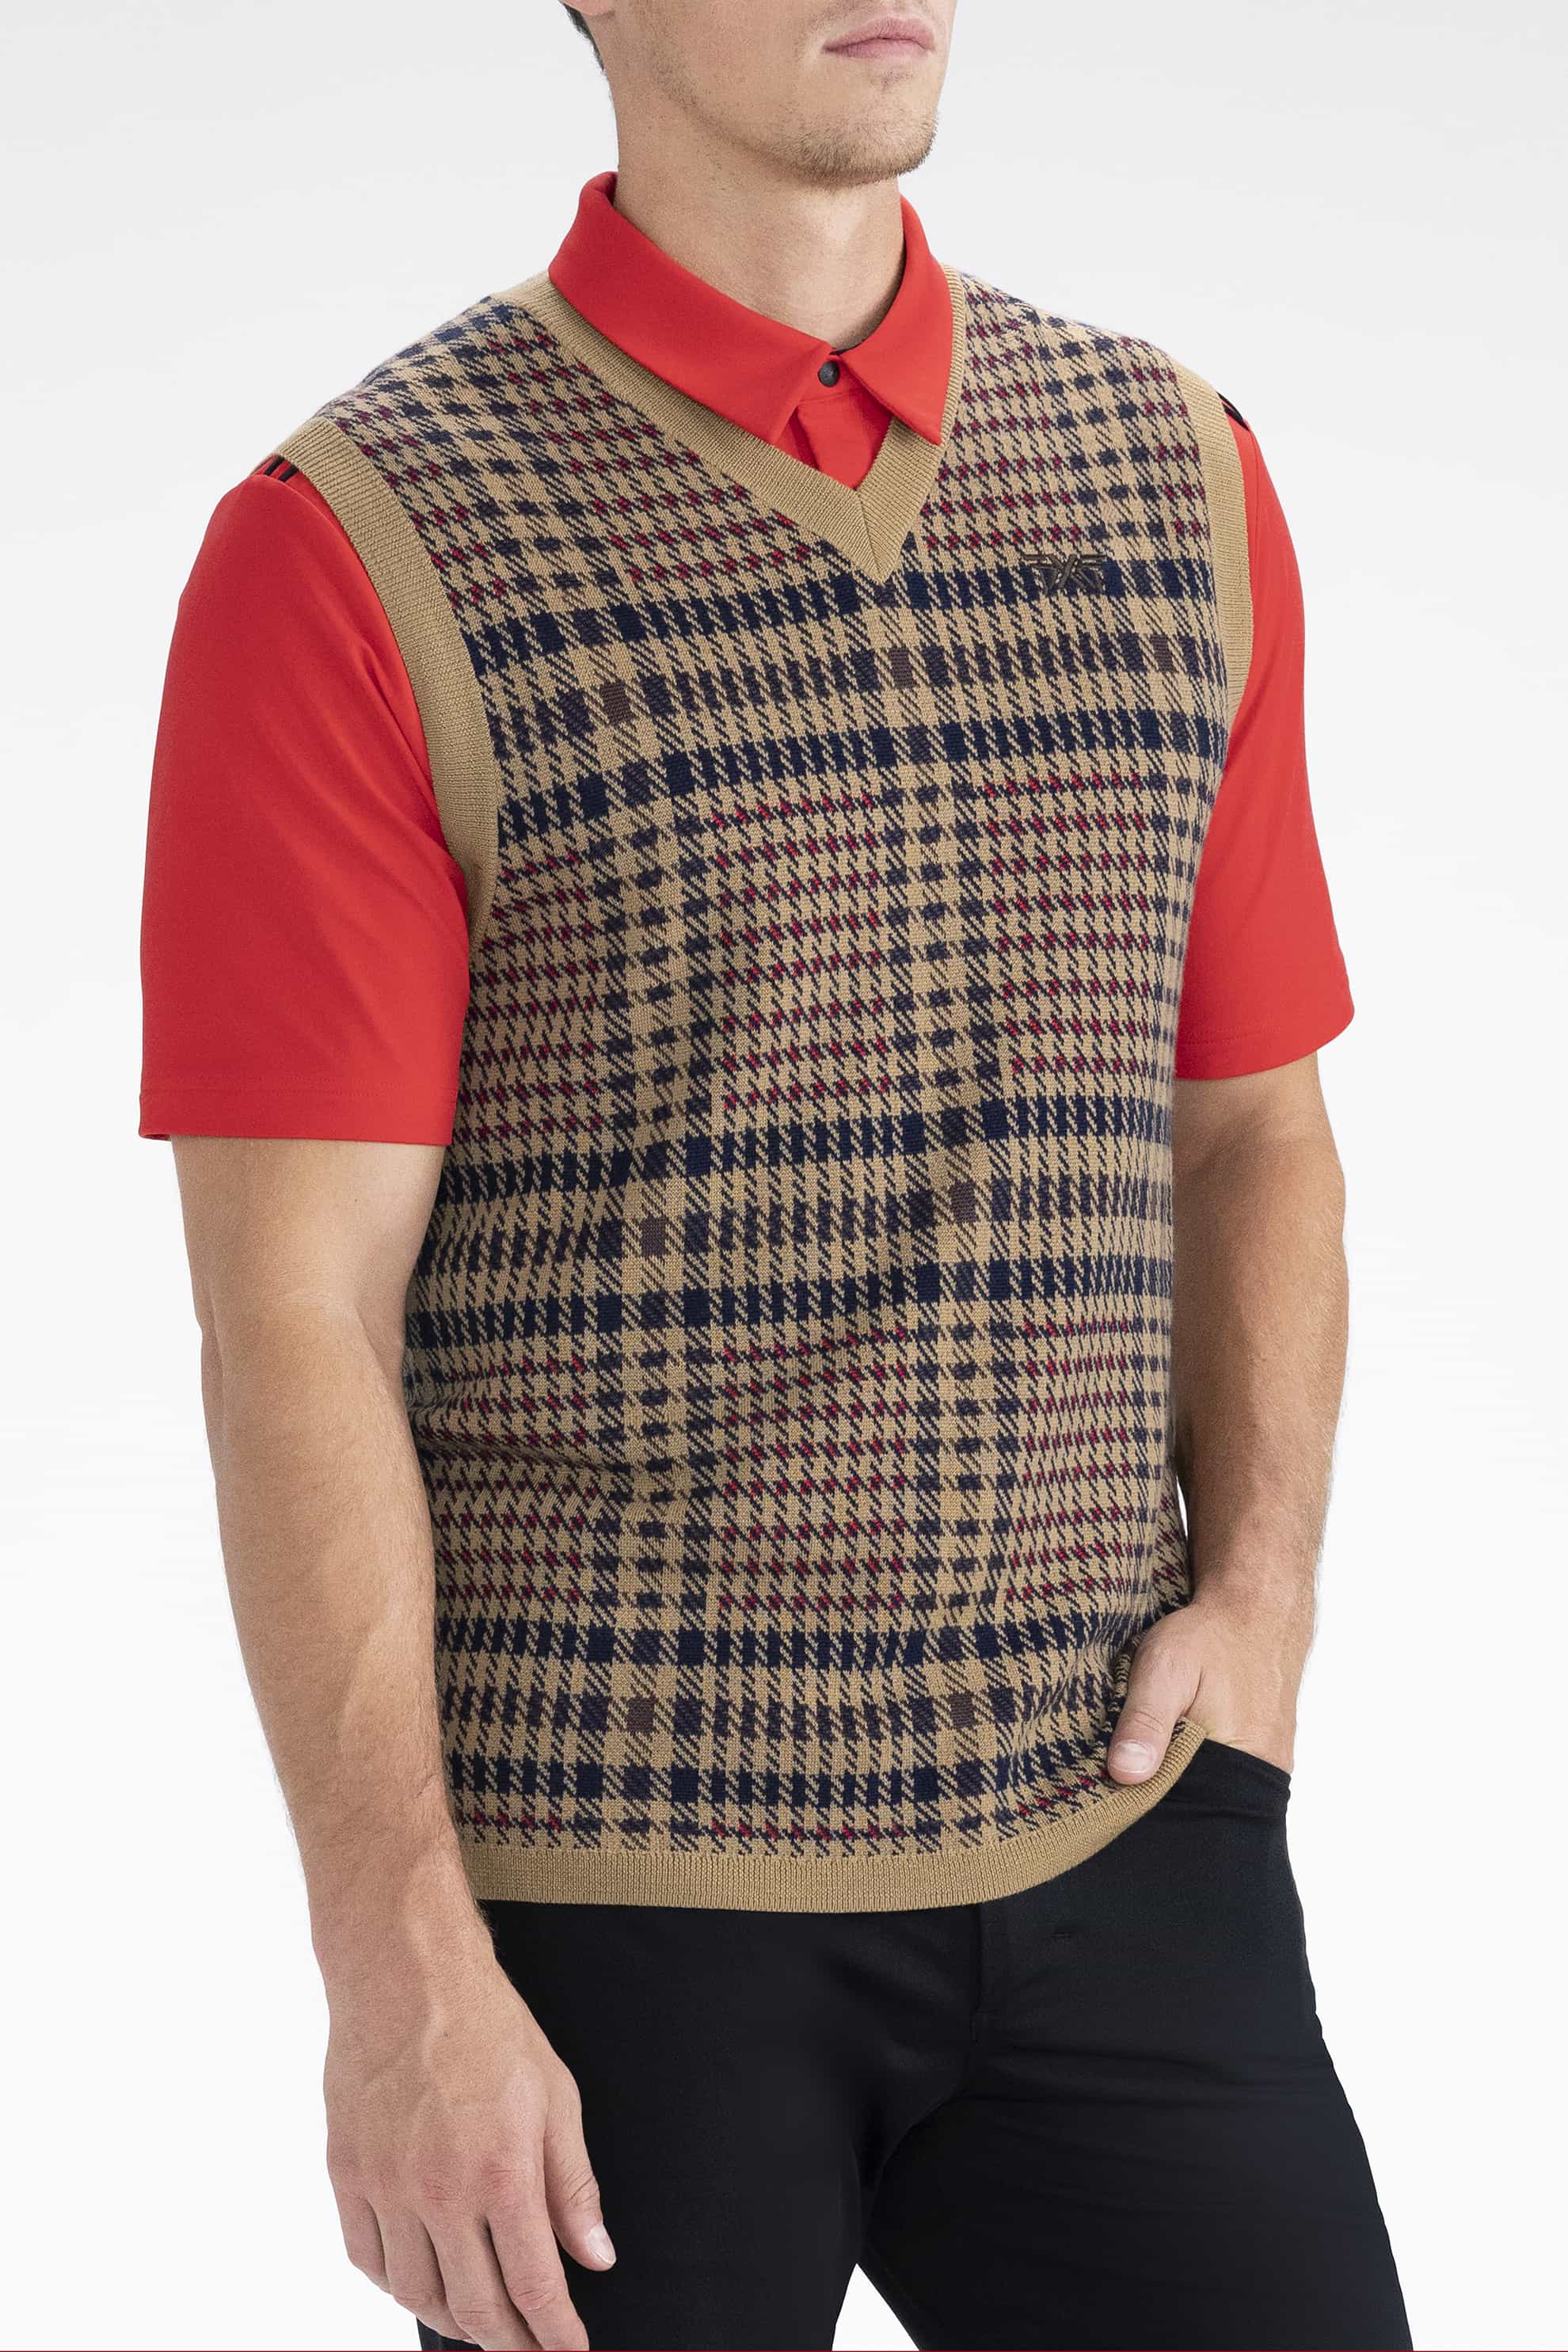 Plaid Sweater Vest | Shop the Highest Quality Golf Apparel, Gear,  Accessories and Golf Clubs at PXG